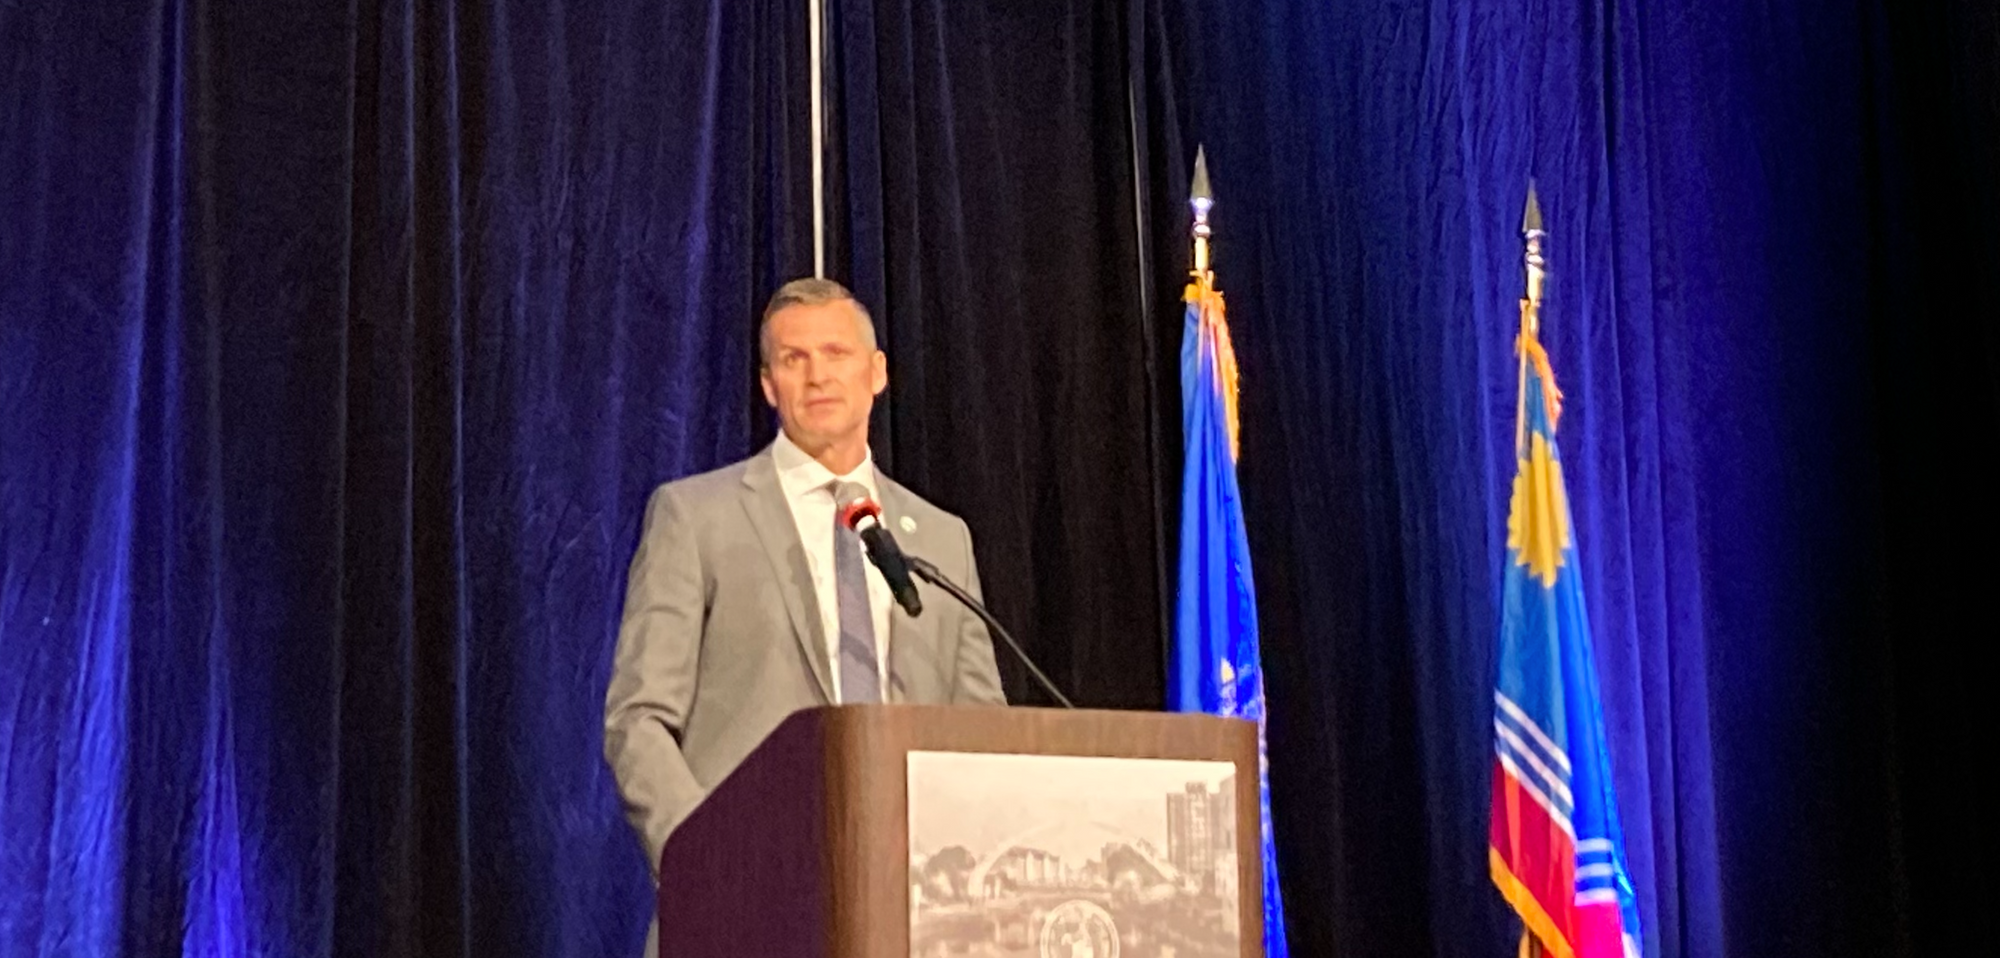 What did we learn from Mayor TenHaken's State of the City address?